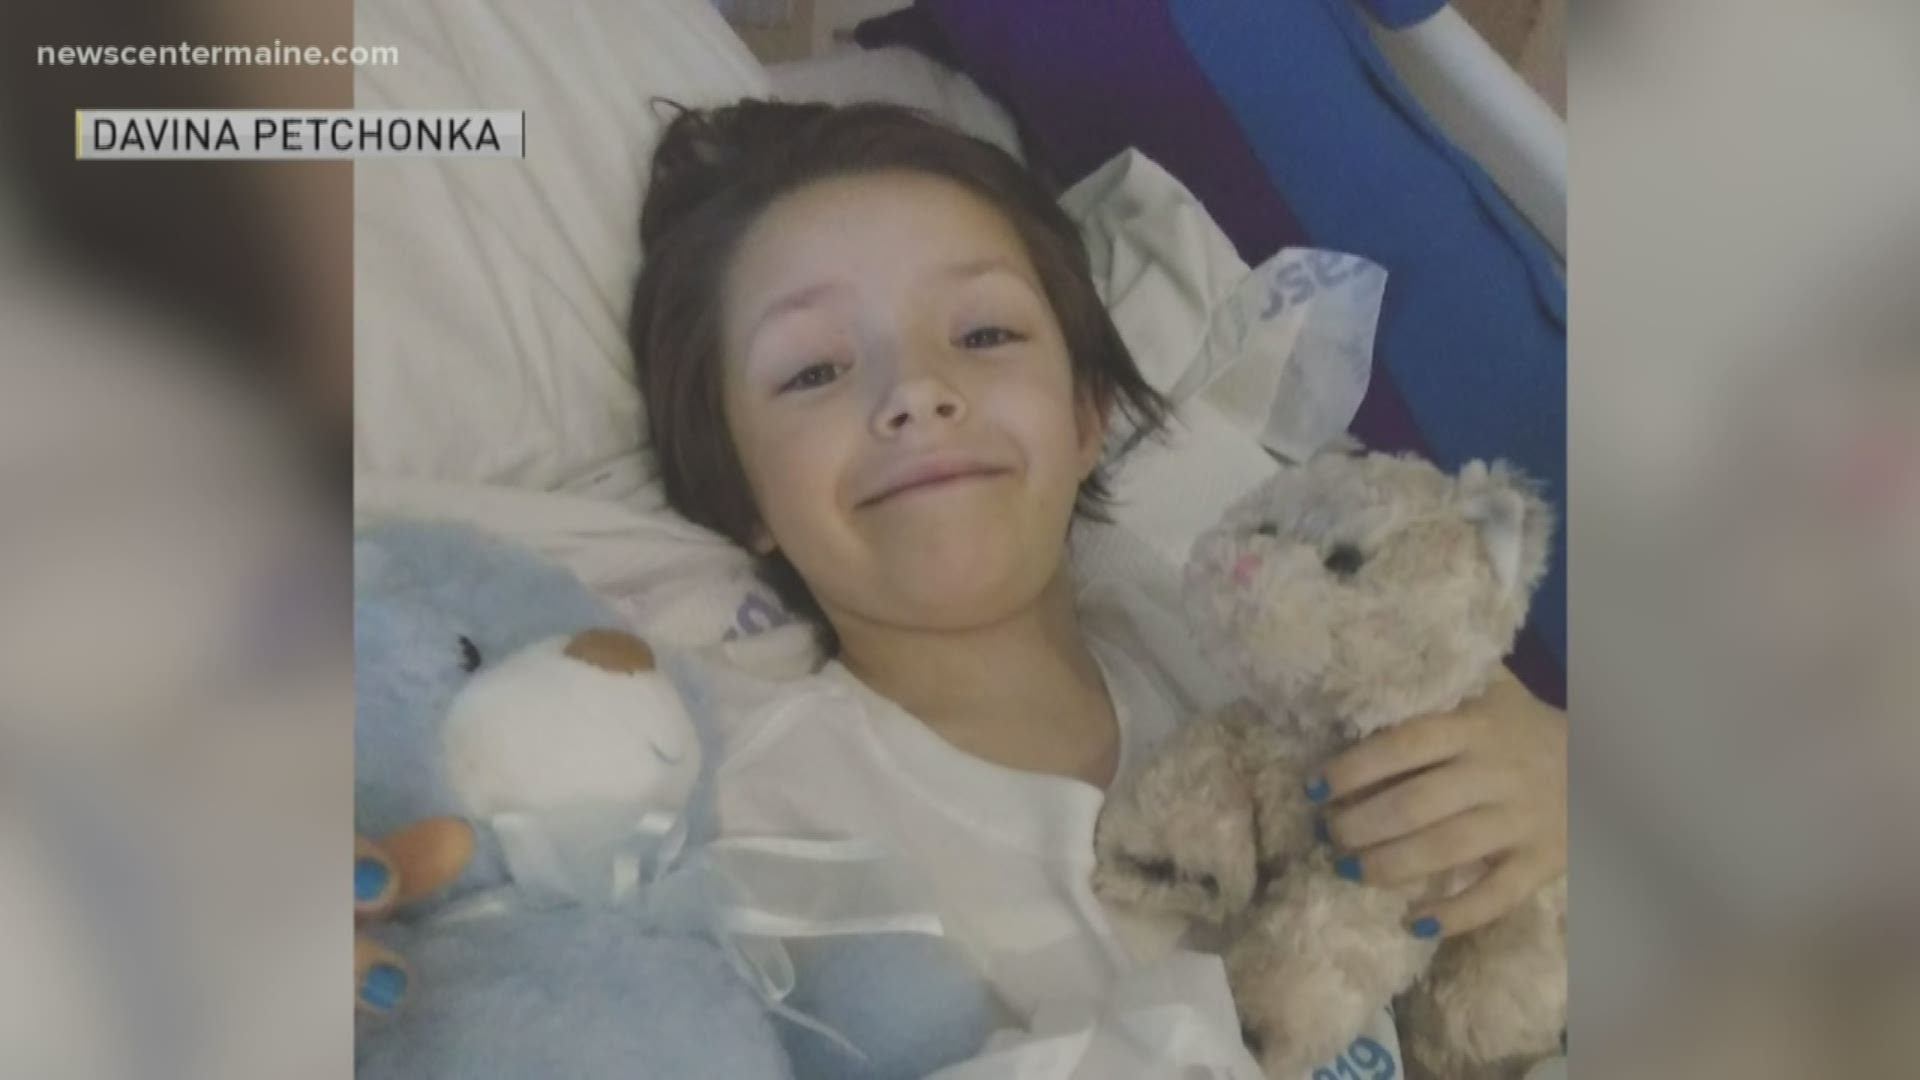 7-year-old Waterville girl "doing great" after being shot